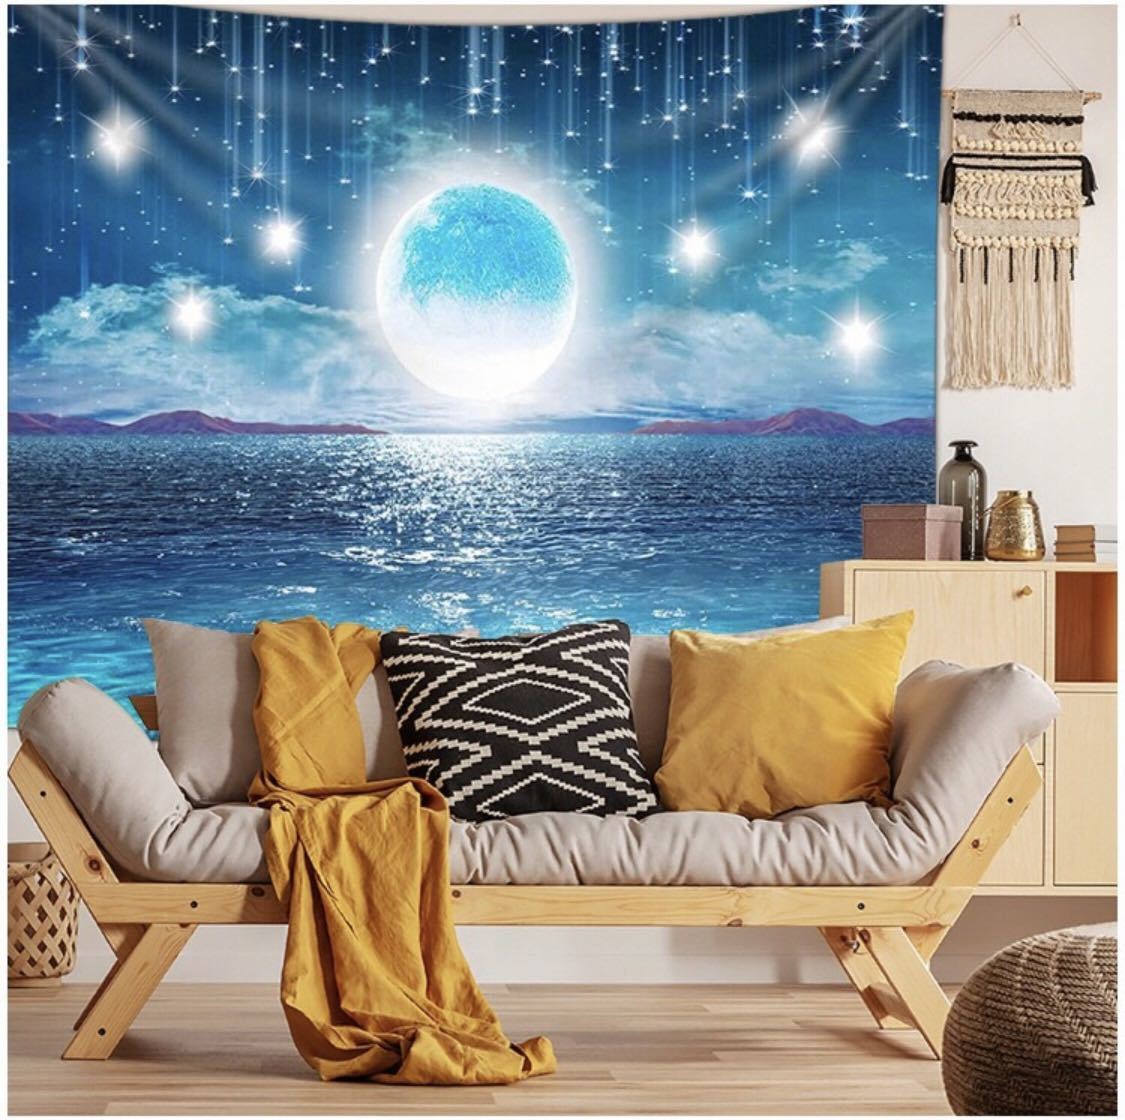 Tapestry wall hanging interior decor Instagram poster sea moon stars night sky night view, Handmade items, interior, miscellaneous goods, panel, Tapestry